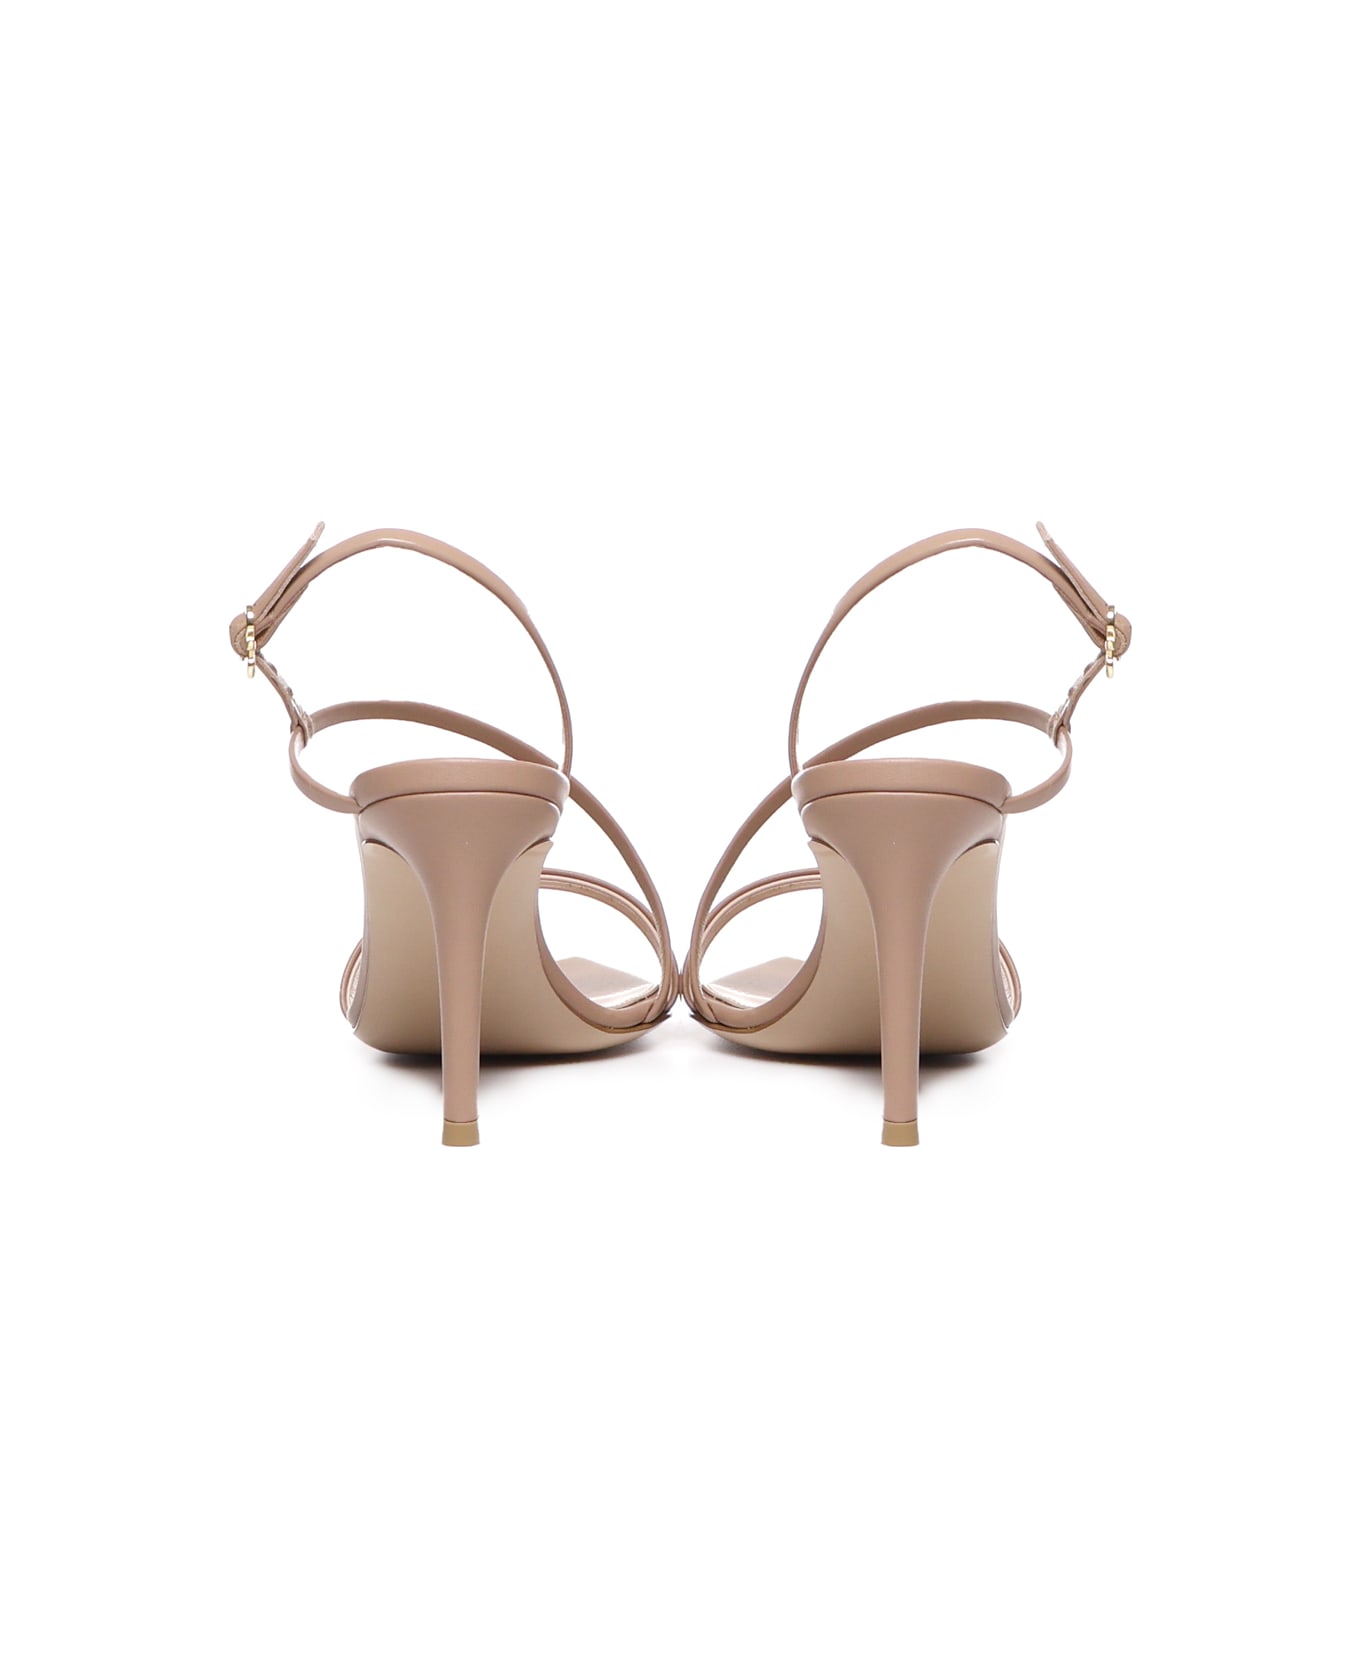 Gianvito Rossi Calfskin Sandals With Pointed Toe - Praline